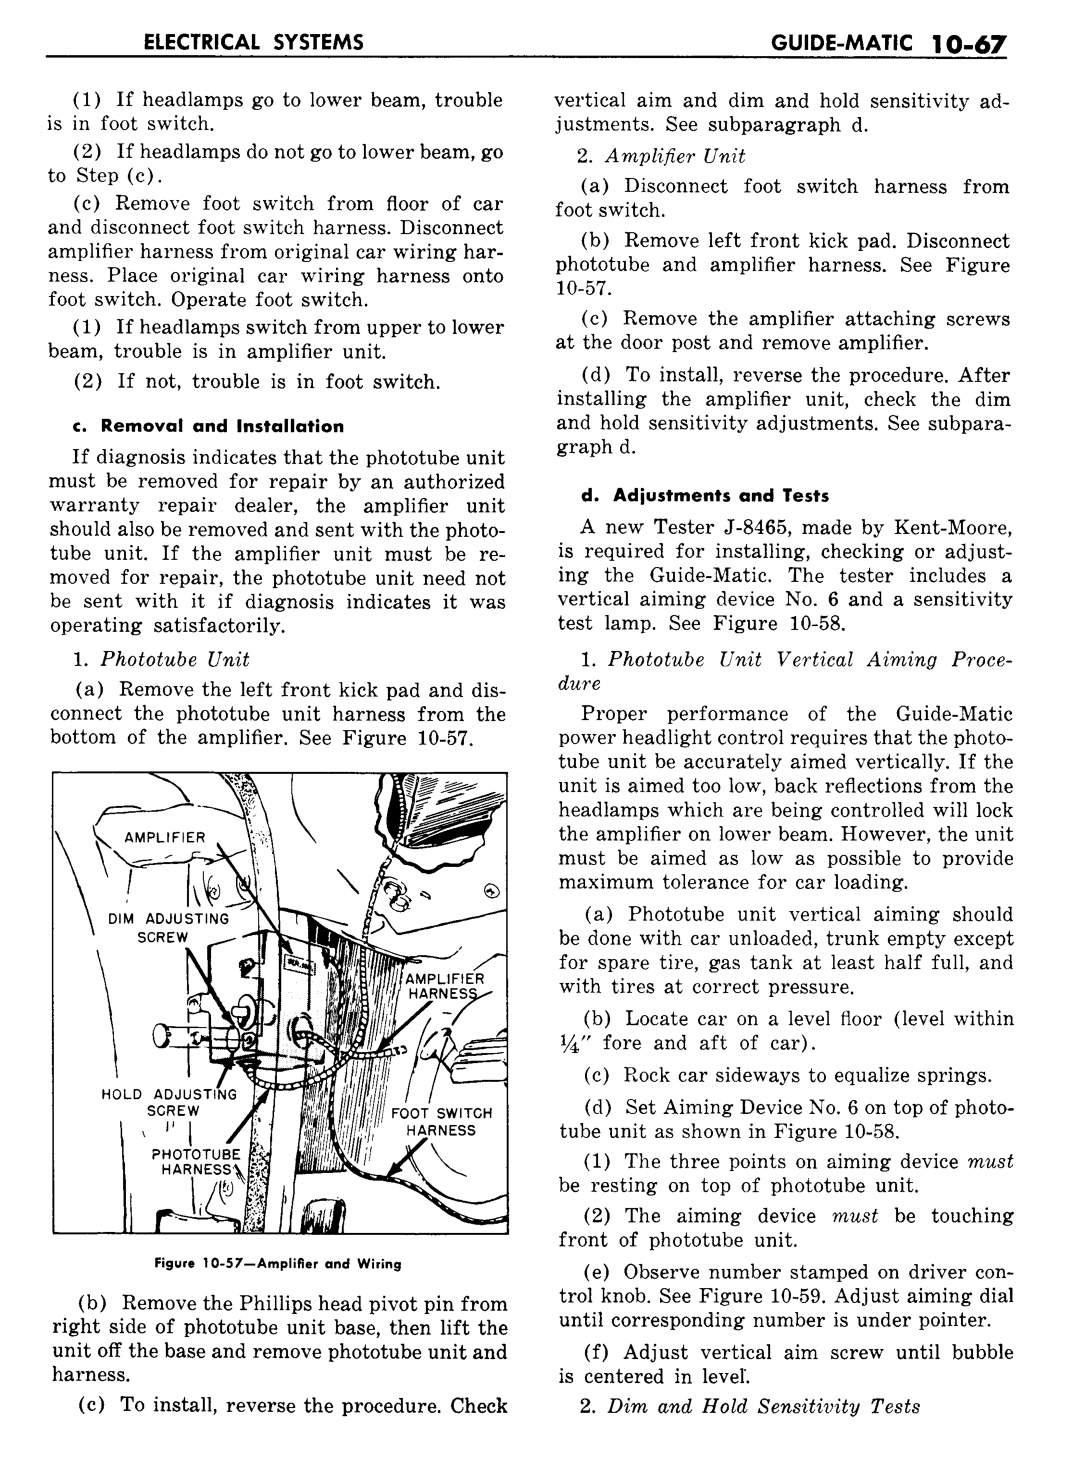 n_11 1960 Buick Shop Manual - Electrical Systems-067-067.jpg